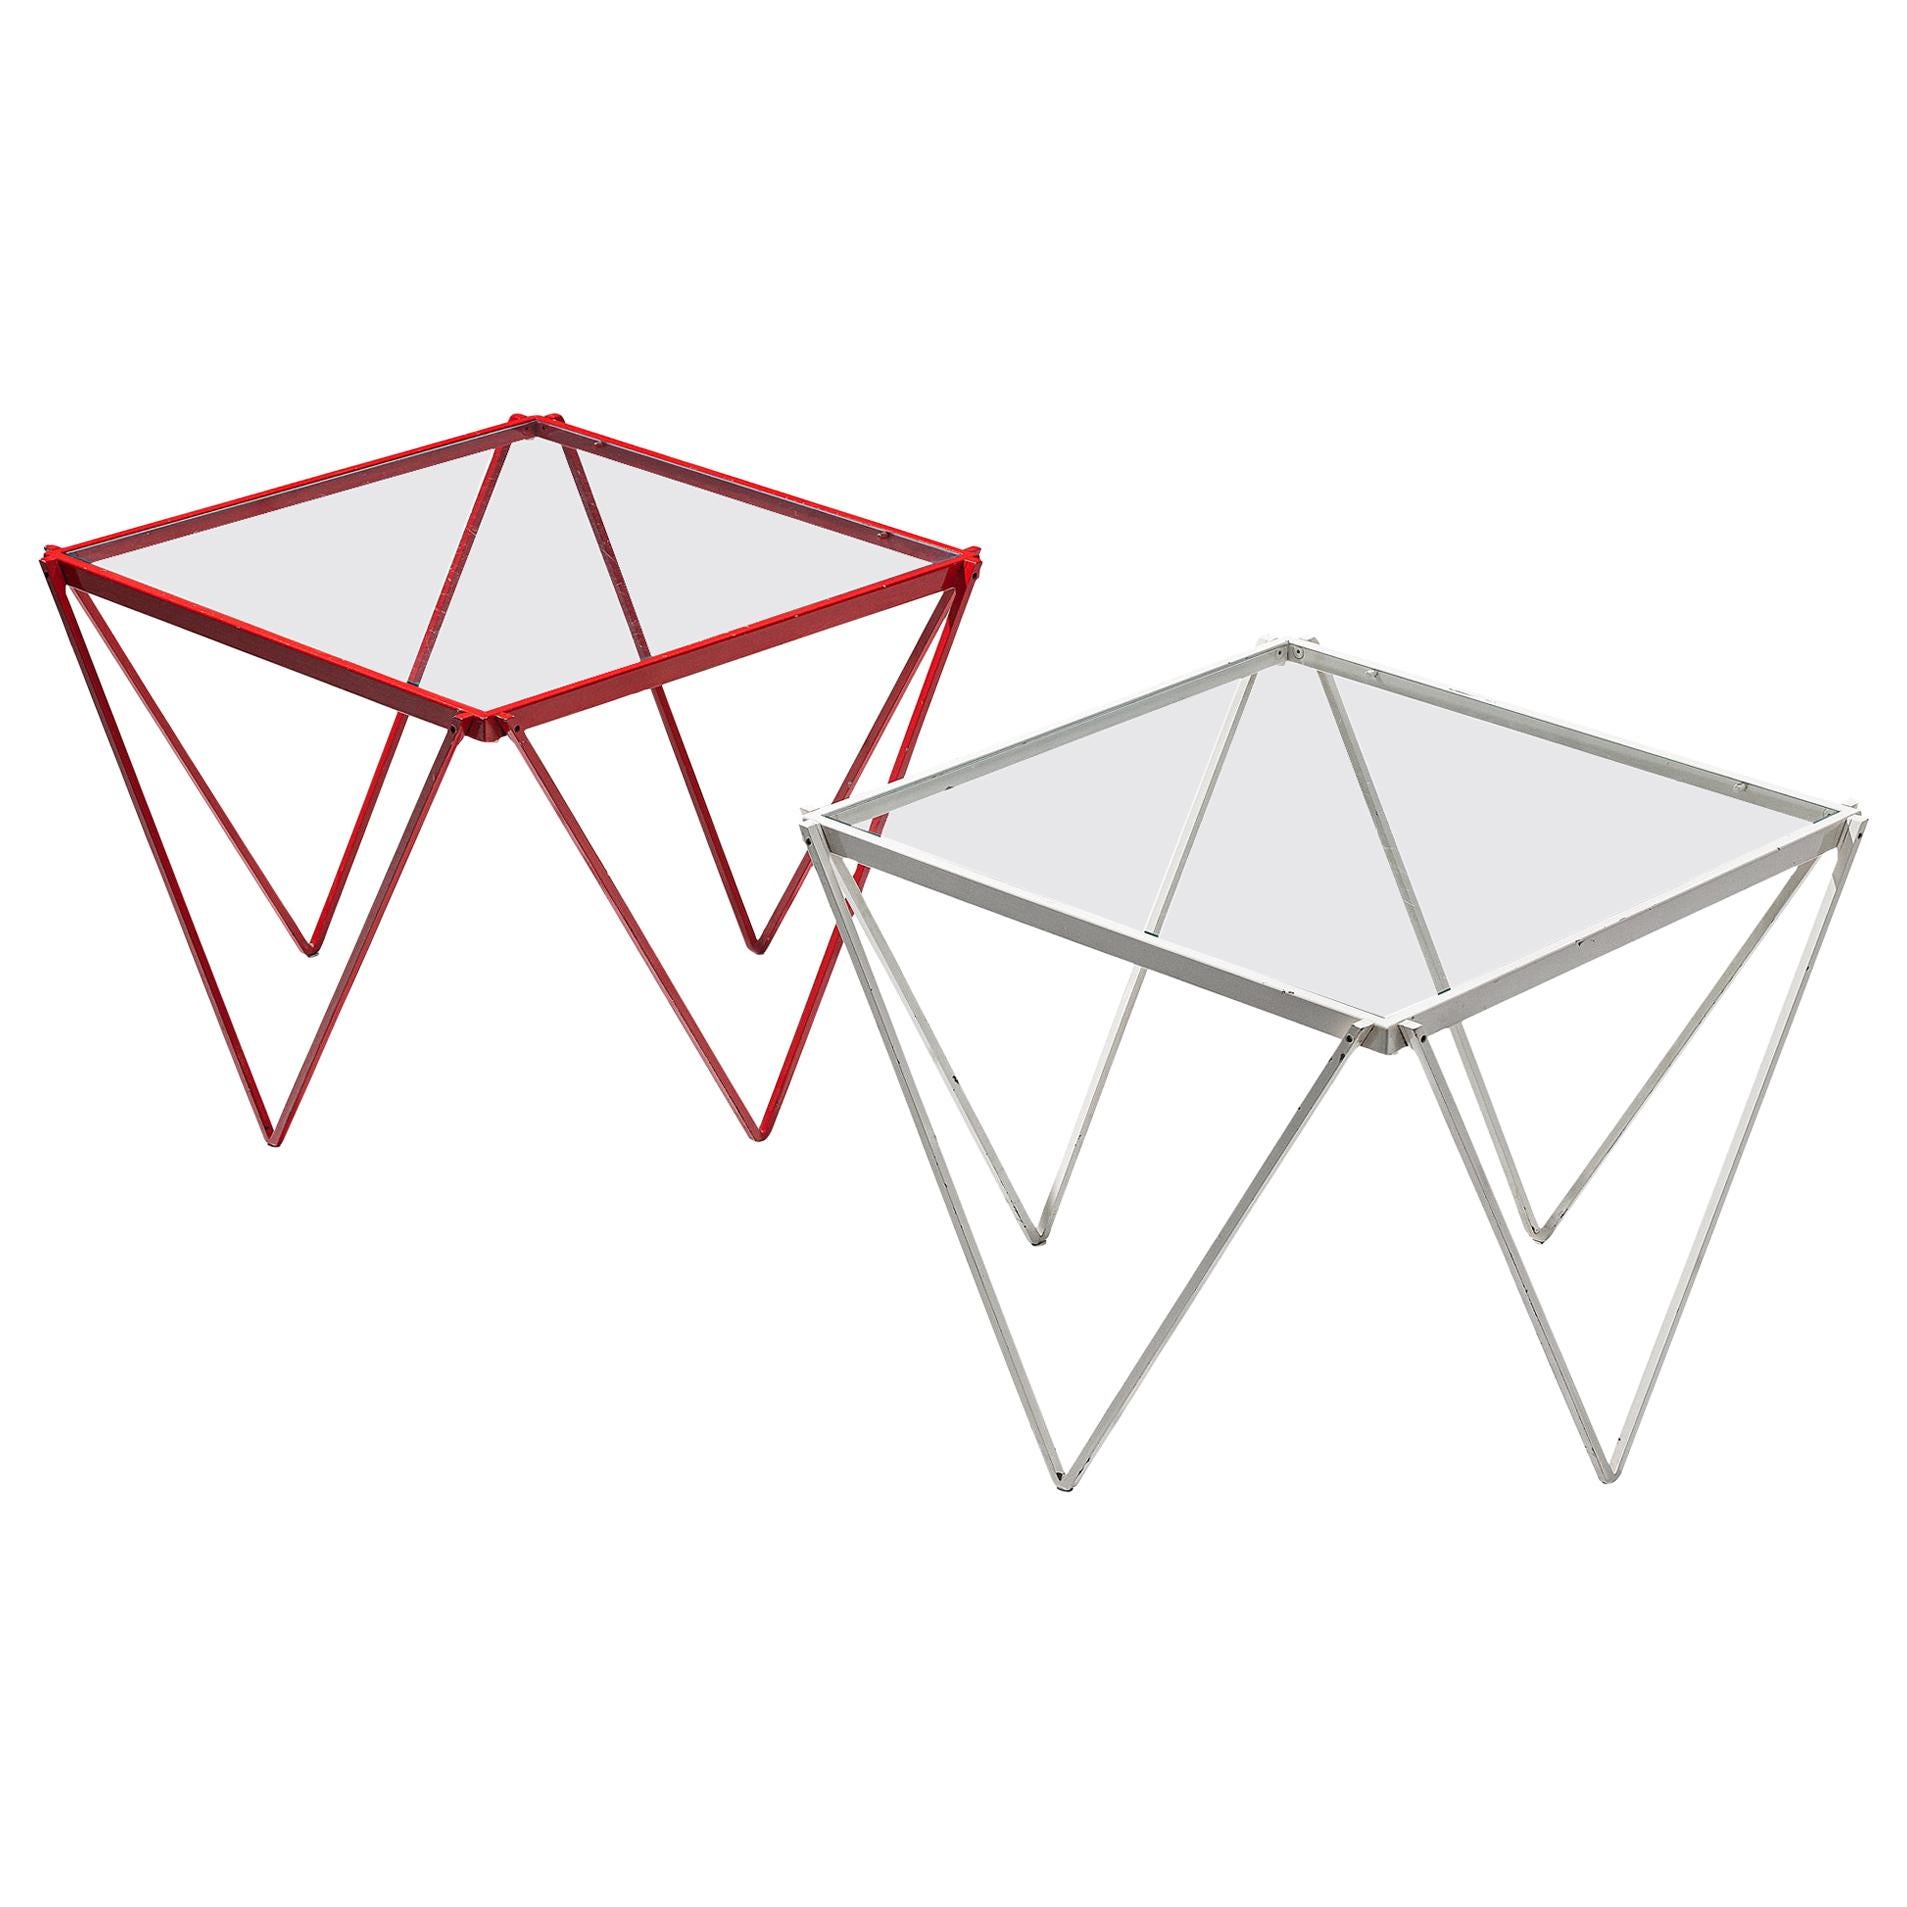 Pair of Minimalistic Nesting Tables in White and Red Lacquered Metal